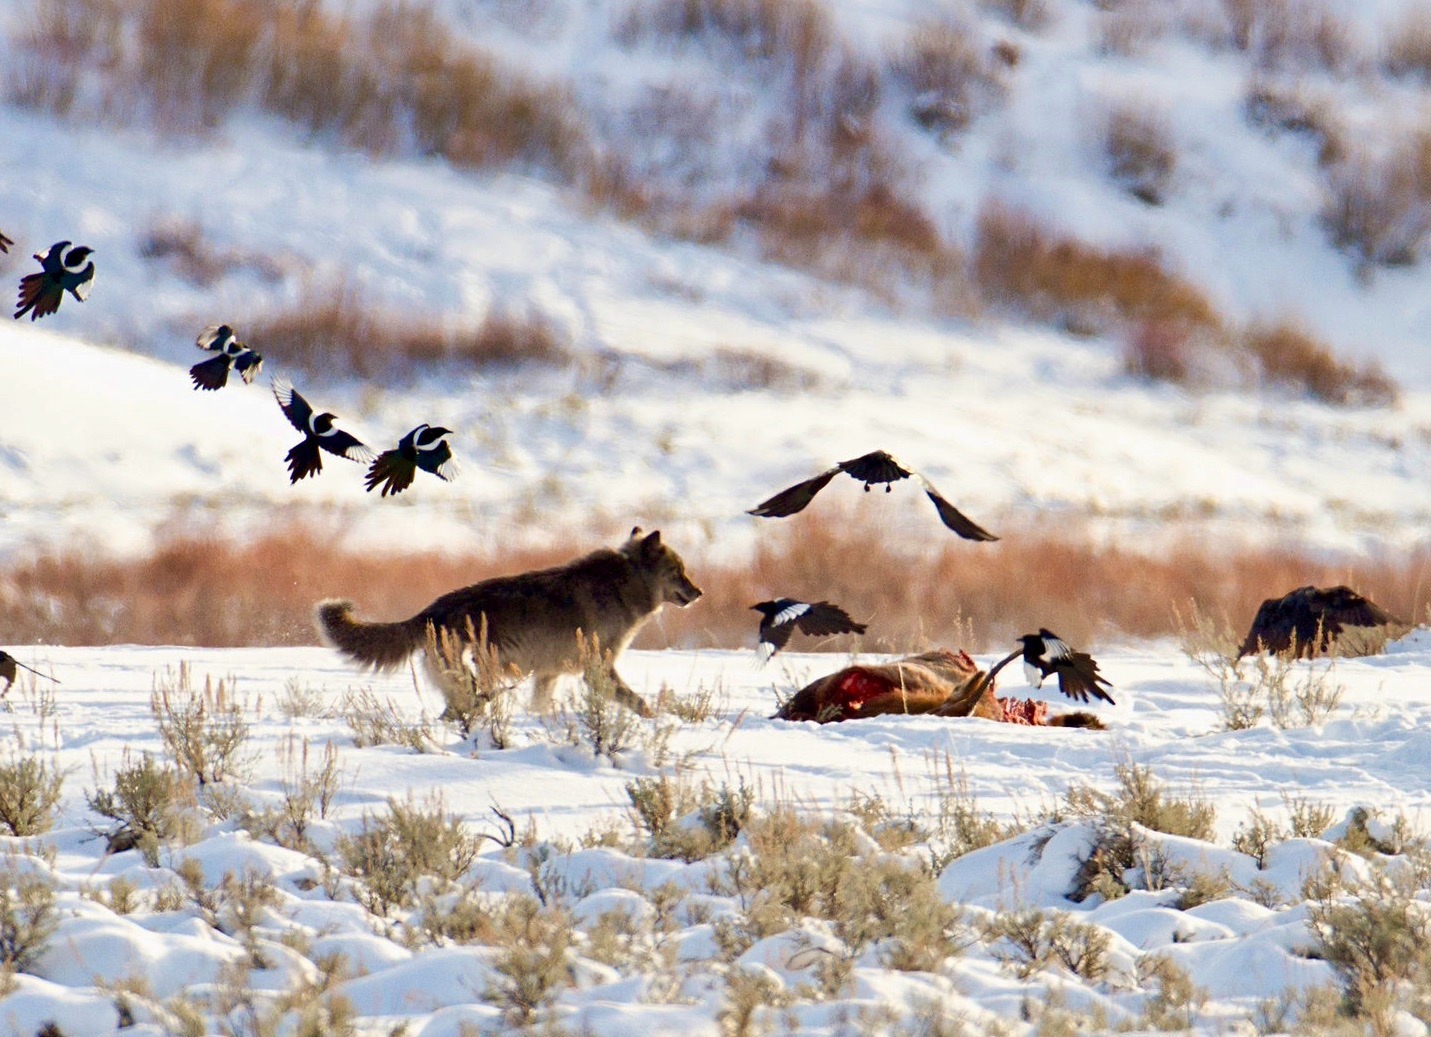 A wolf in Yellowstone joins magpies in feasting upon an elk carcass. Throughout the West, dead animals attract scavengers. In cattle country, experience has shown that conflicts between ranchers and predators can be reduced when dead cattle and sheep, which can attract wolves, bears and mountain lions are removed from rangeland.  Photo courtesy Jim Peaco/NPS